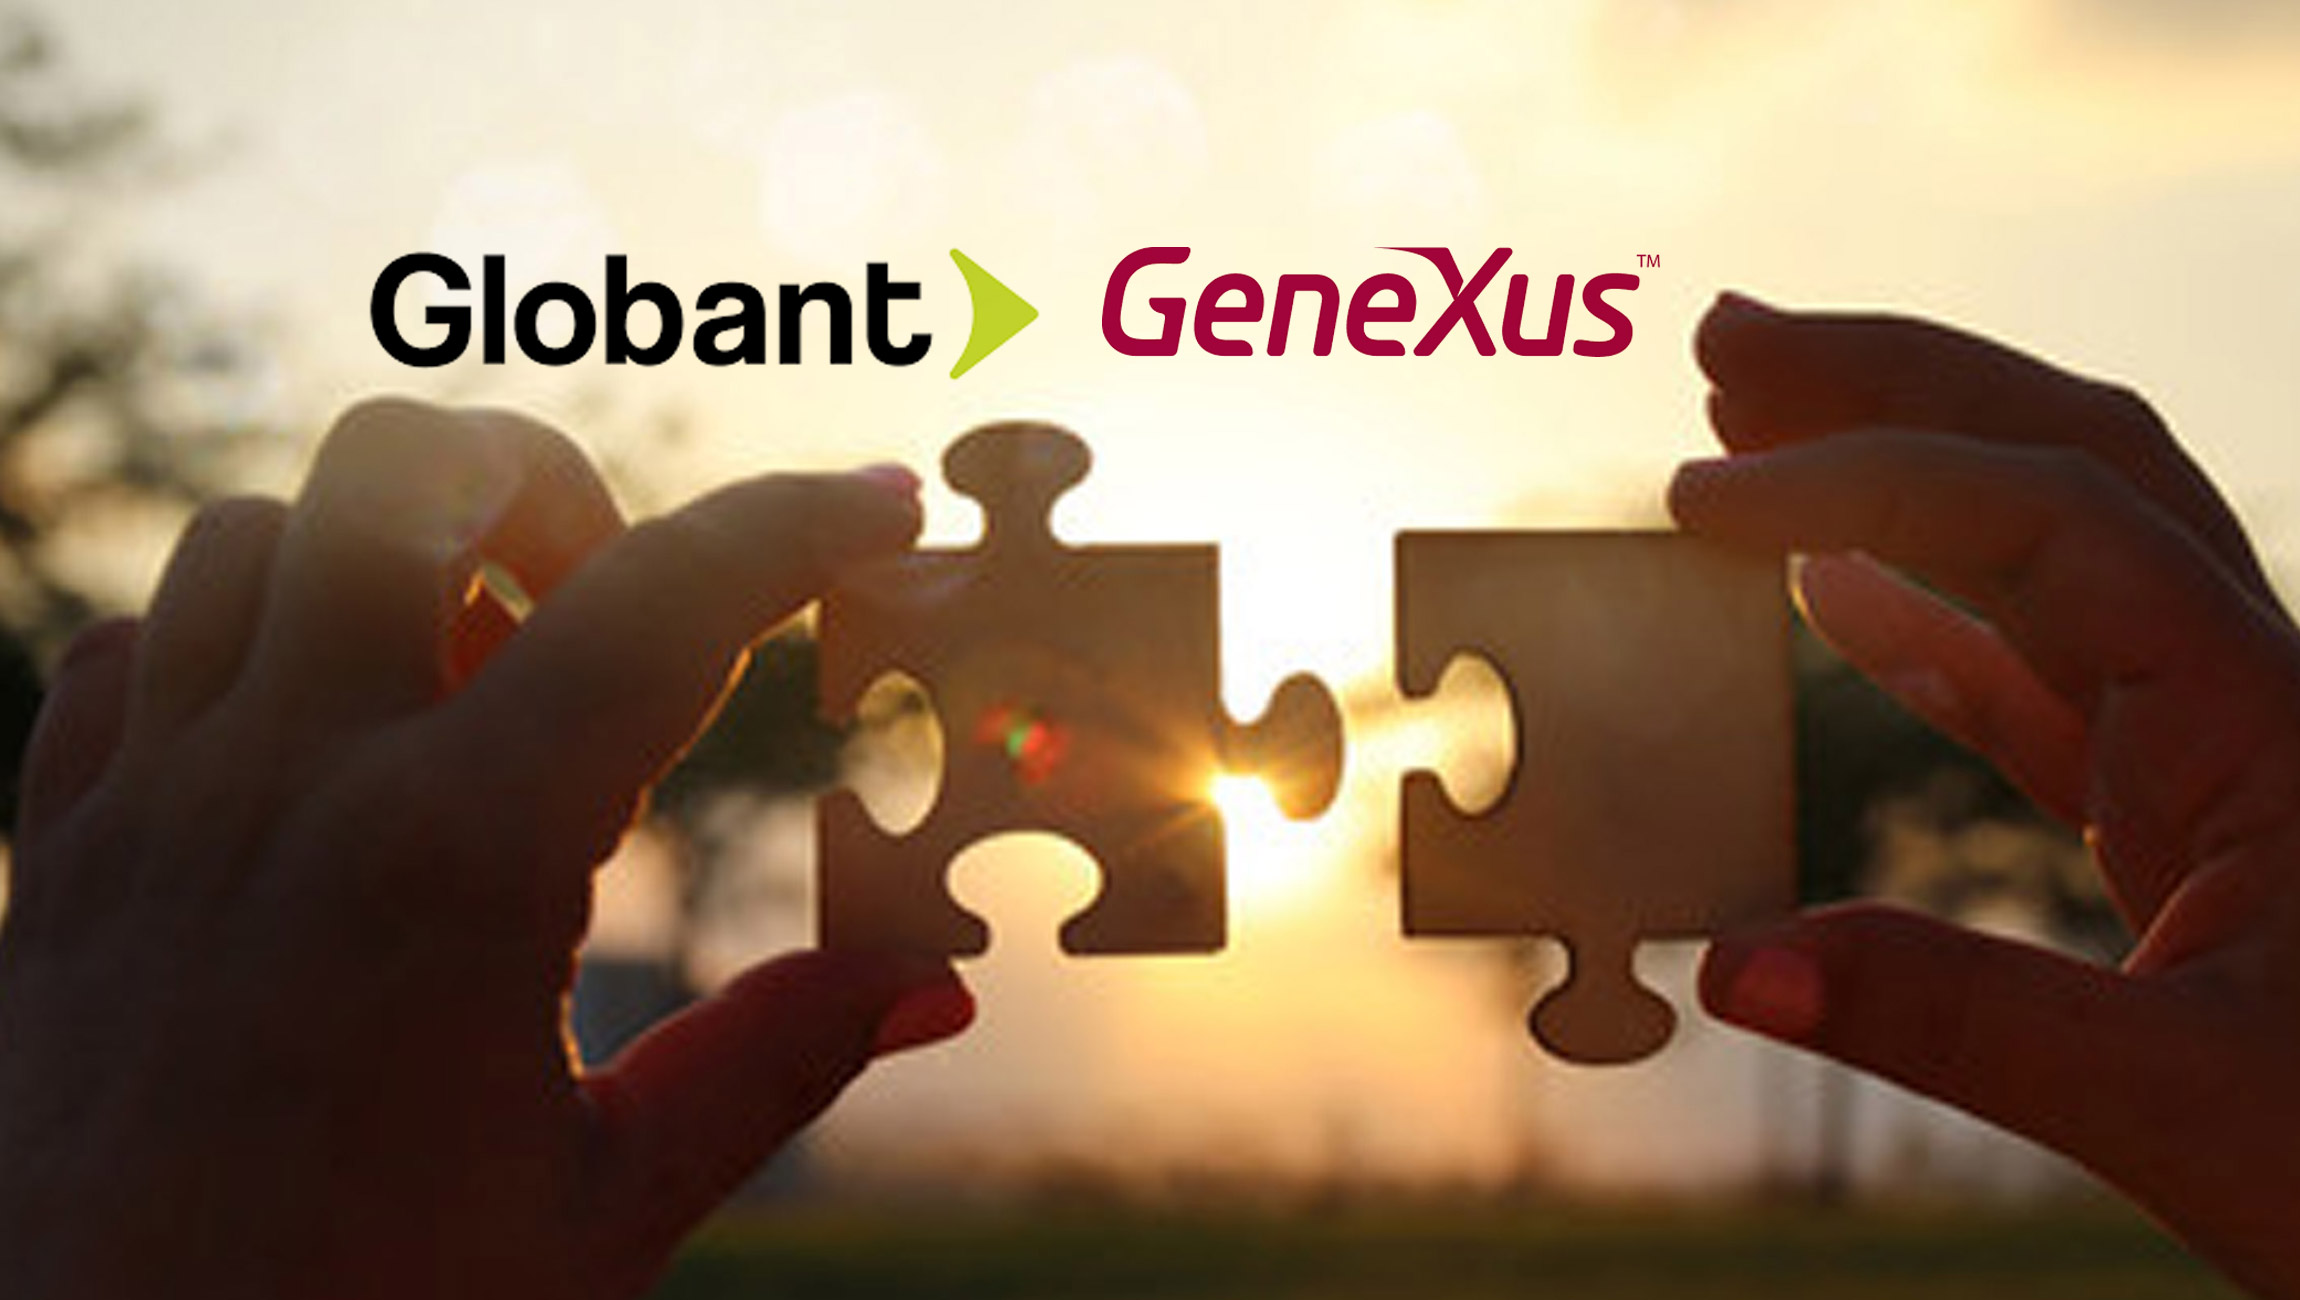 Globant Acquires Low-code Platform GeneXus to Foster Business Reinvention and Expand its Product Portfolio